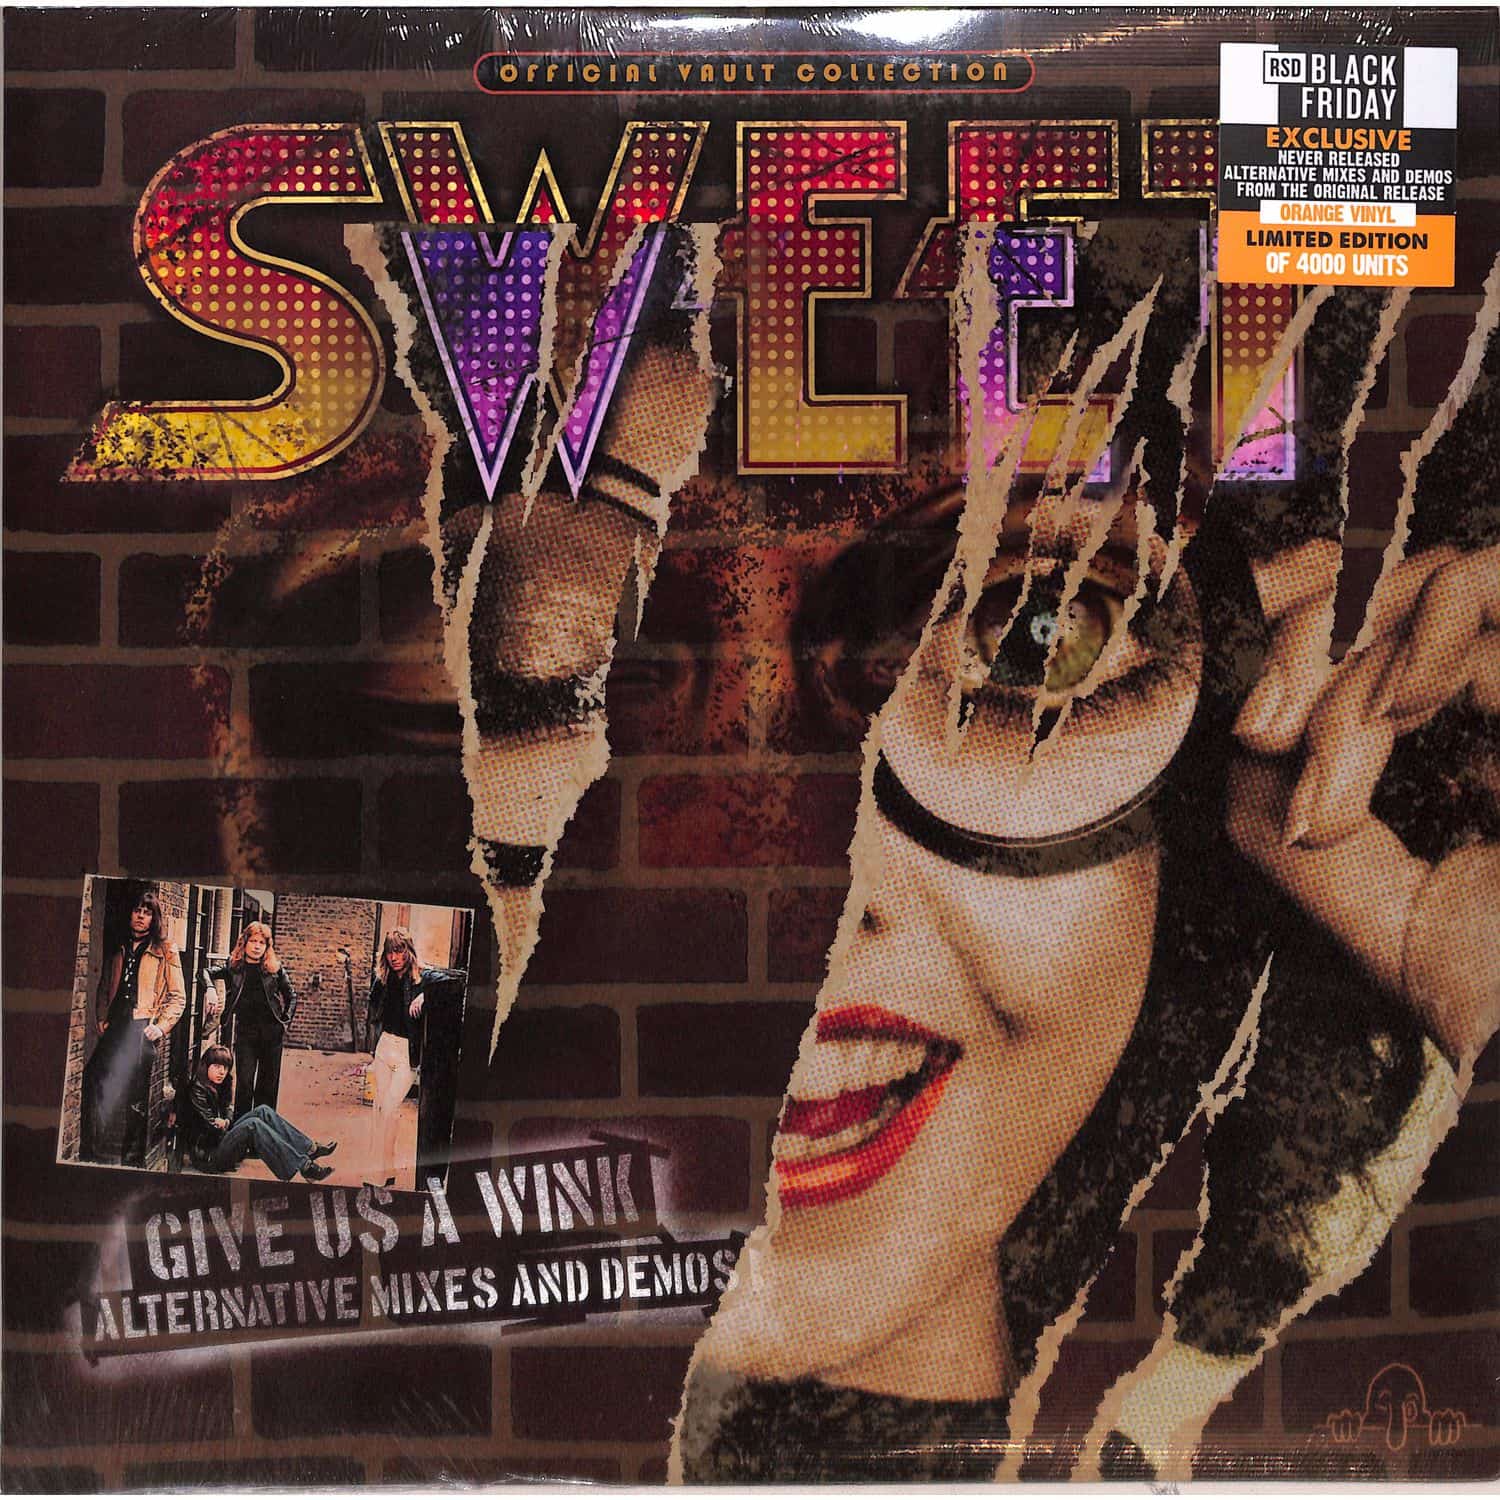 Sweet - GIVE US A WINK 